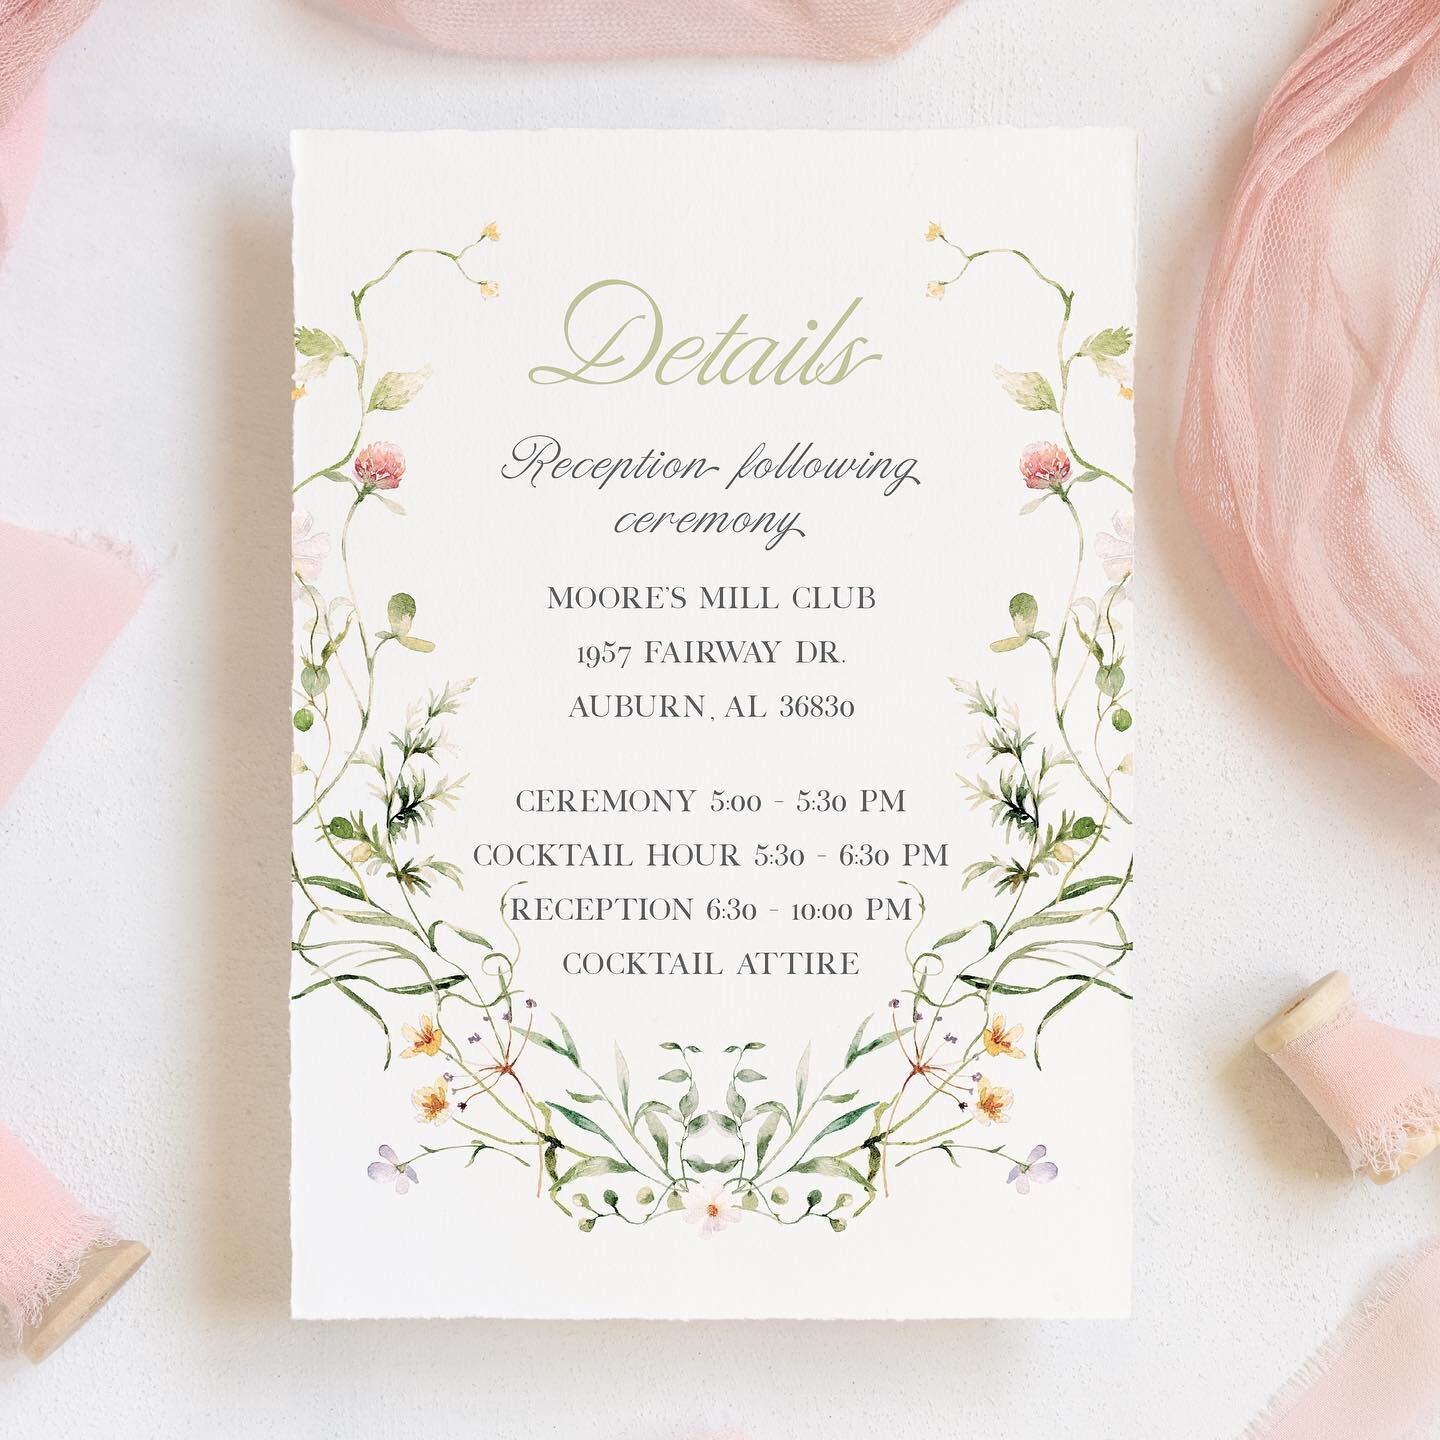 Spring is here and so are floral illustrations!!! These are a few examples of how you can incorporate floral crests, borders, and frames into your stationery suite. This is a beautiful look for spring and summer weddings 🌸🌷🌼

#floralwedding #weddi